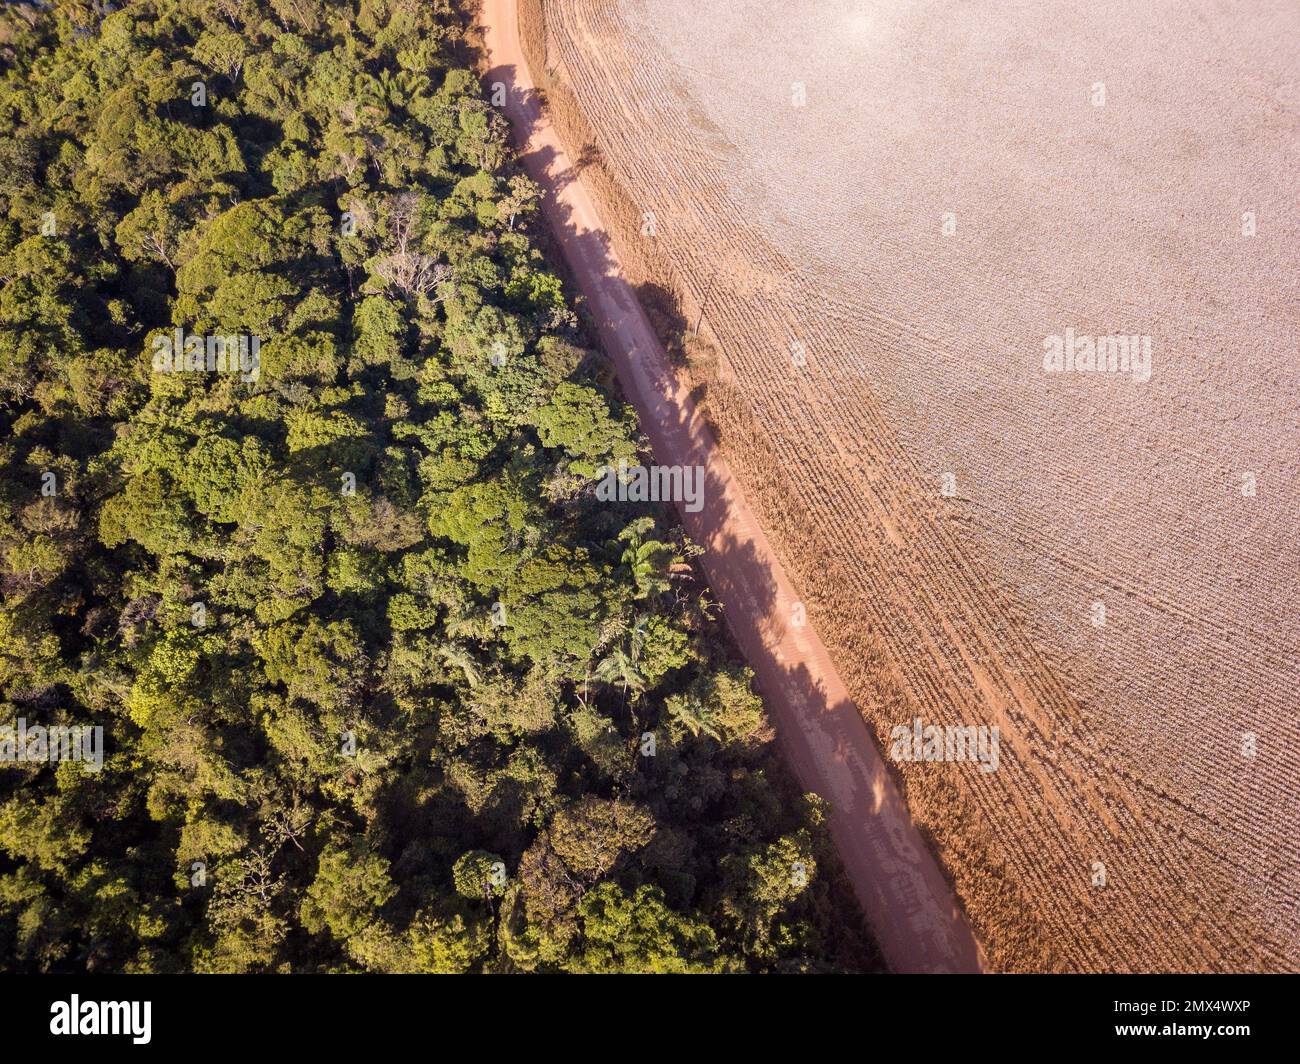 Aerial view of illegal Amazon deforestation inside cotton farm. Forest trees cut to open land for agriculture field. Concept of climate change, co2. Stock Photo